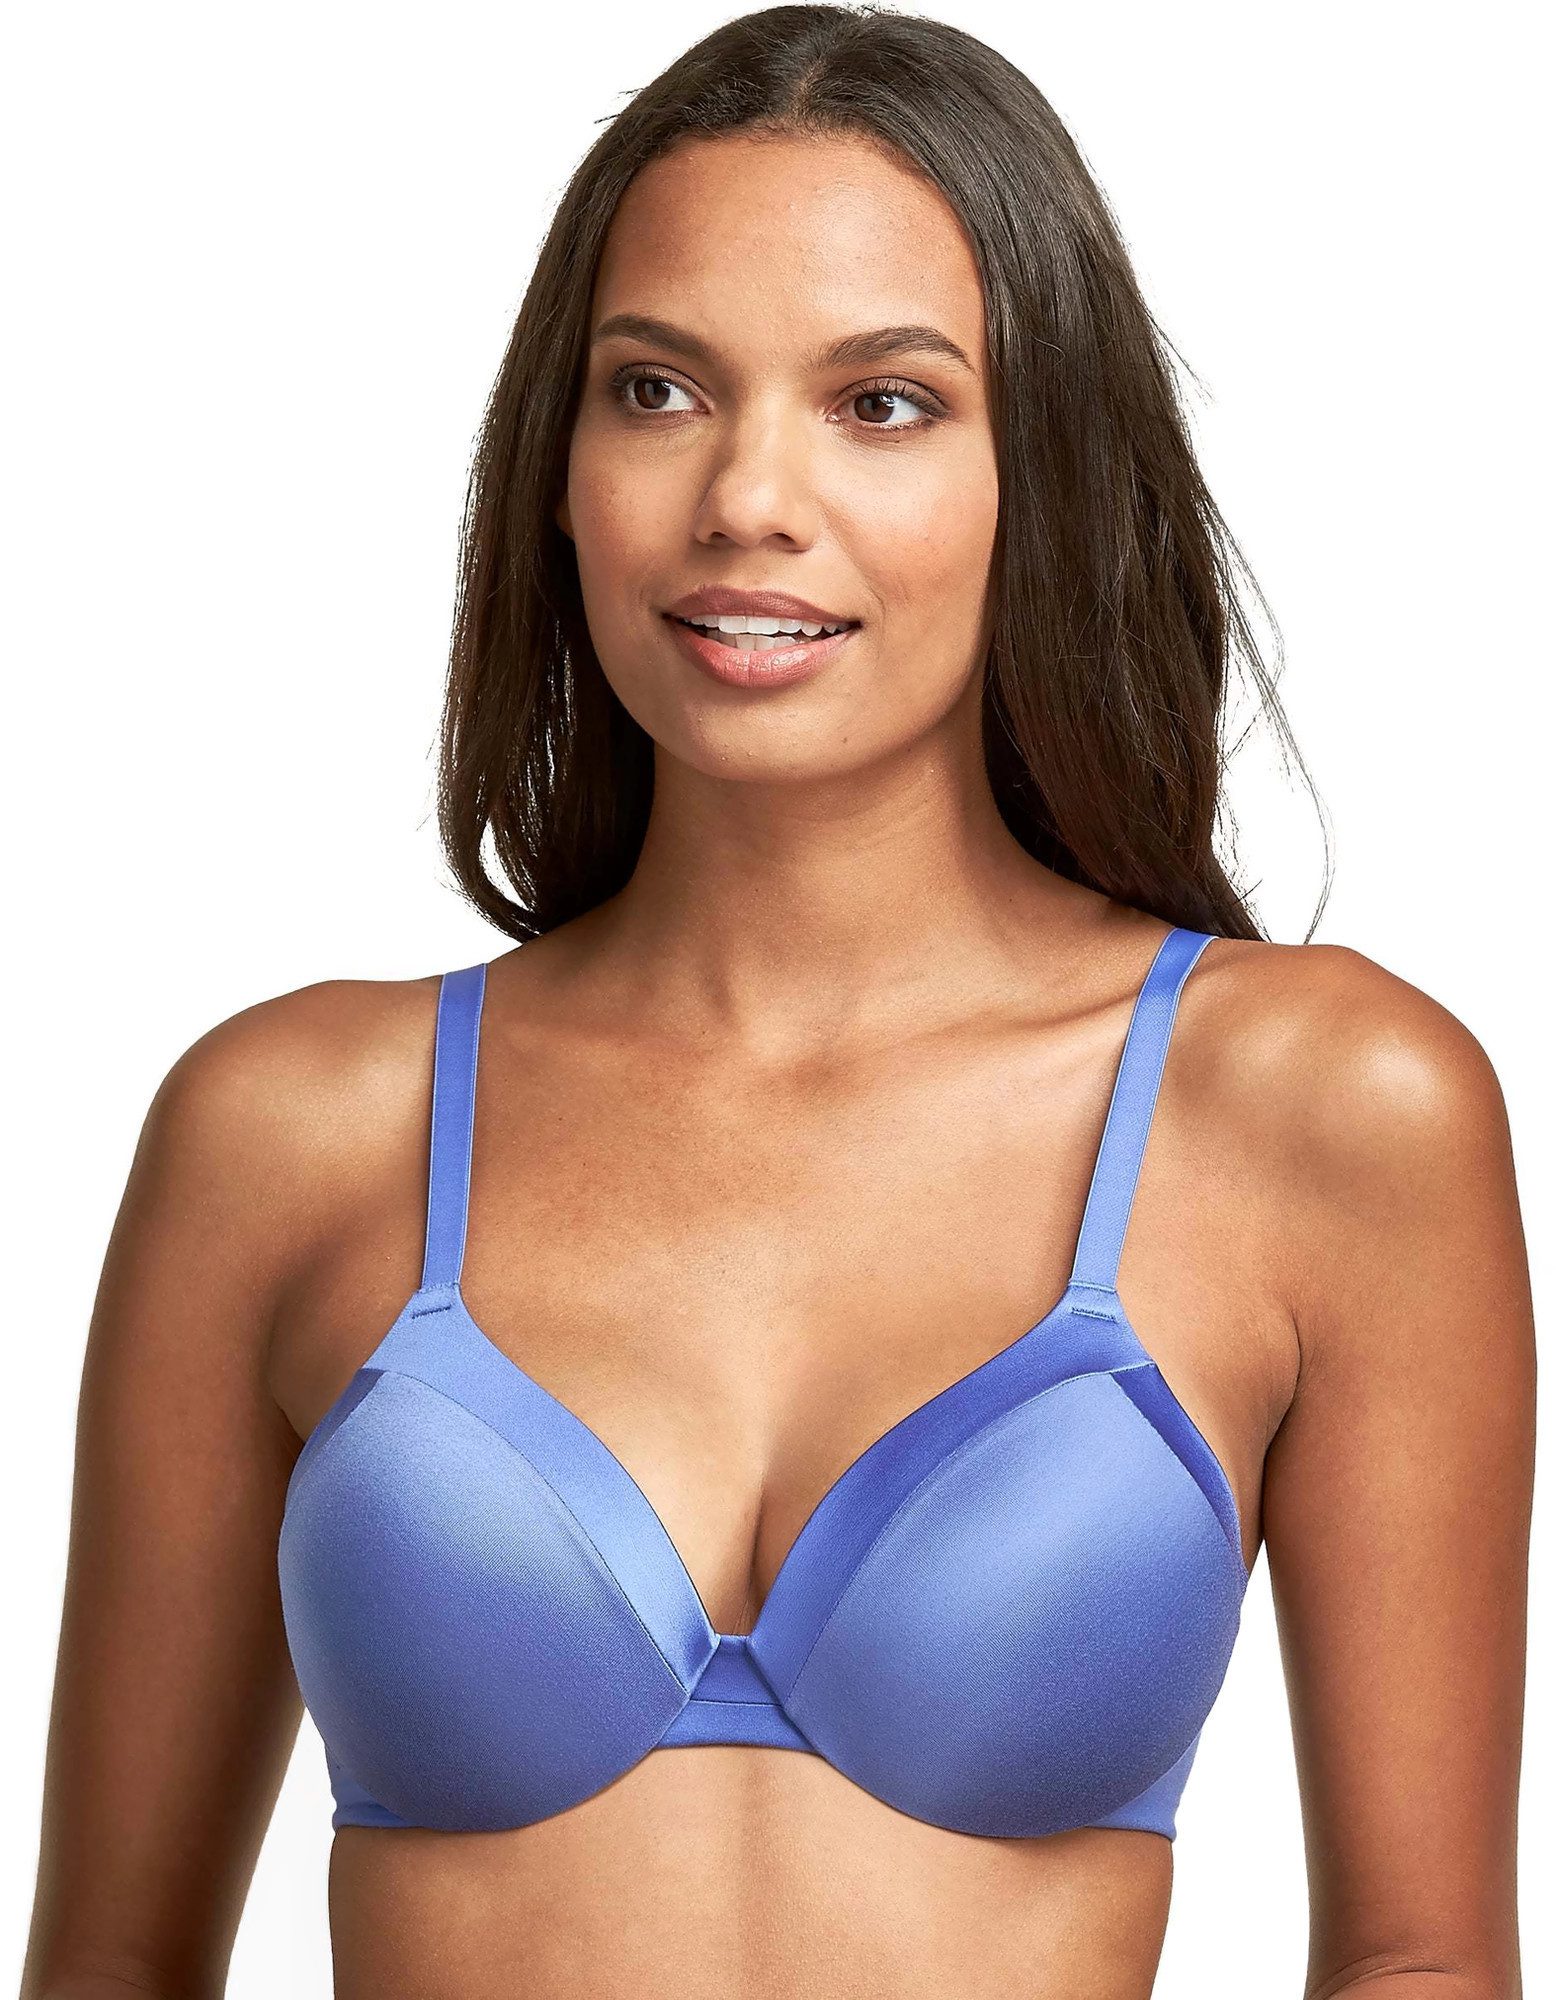 Maidenform Padded Bra - Deep Blue Size undefined - $10 - From Suzanne